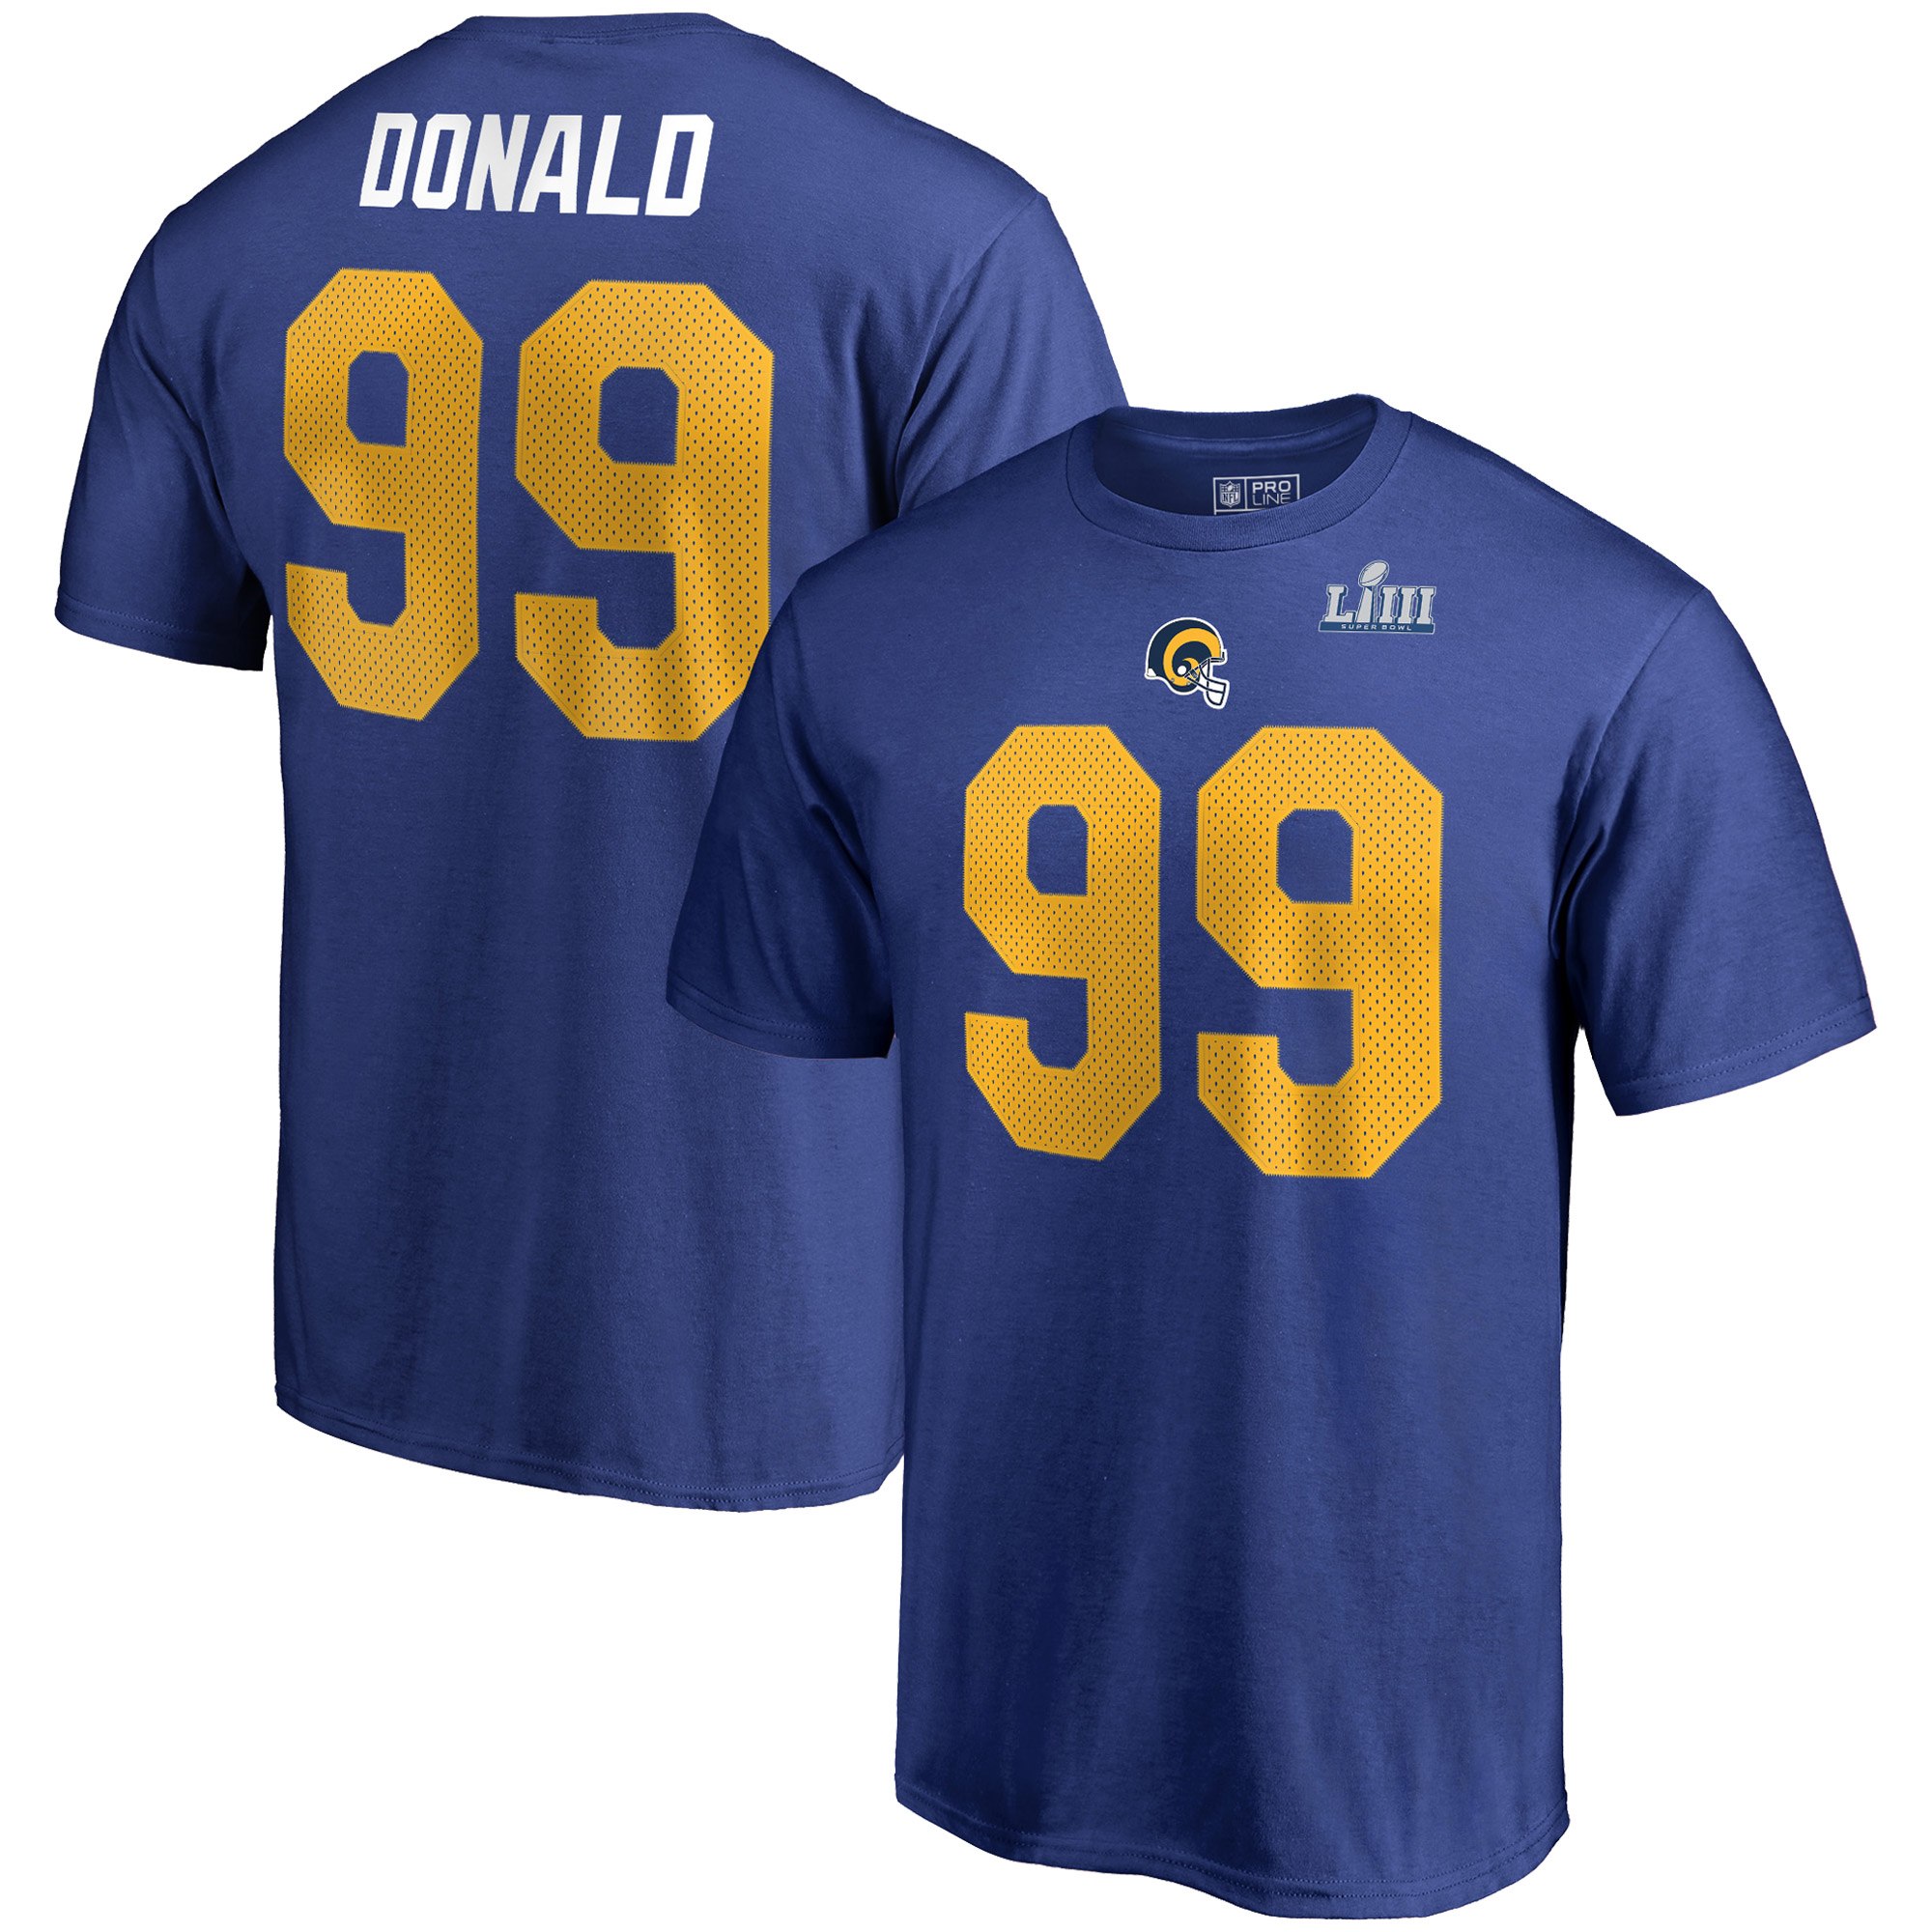 Los Angeles Rams 99 Aaron Donald NFL Pro Line by Fanatics Branded Super Bowl LIII Bound Eligible Receiver Name & Number T-Shirt Royal